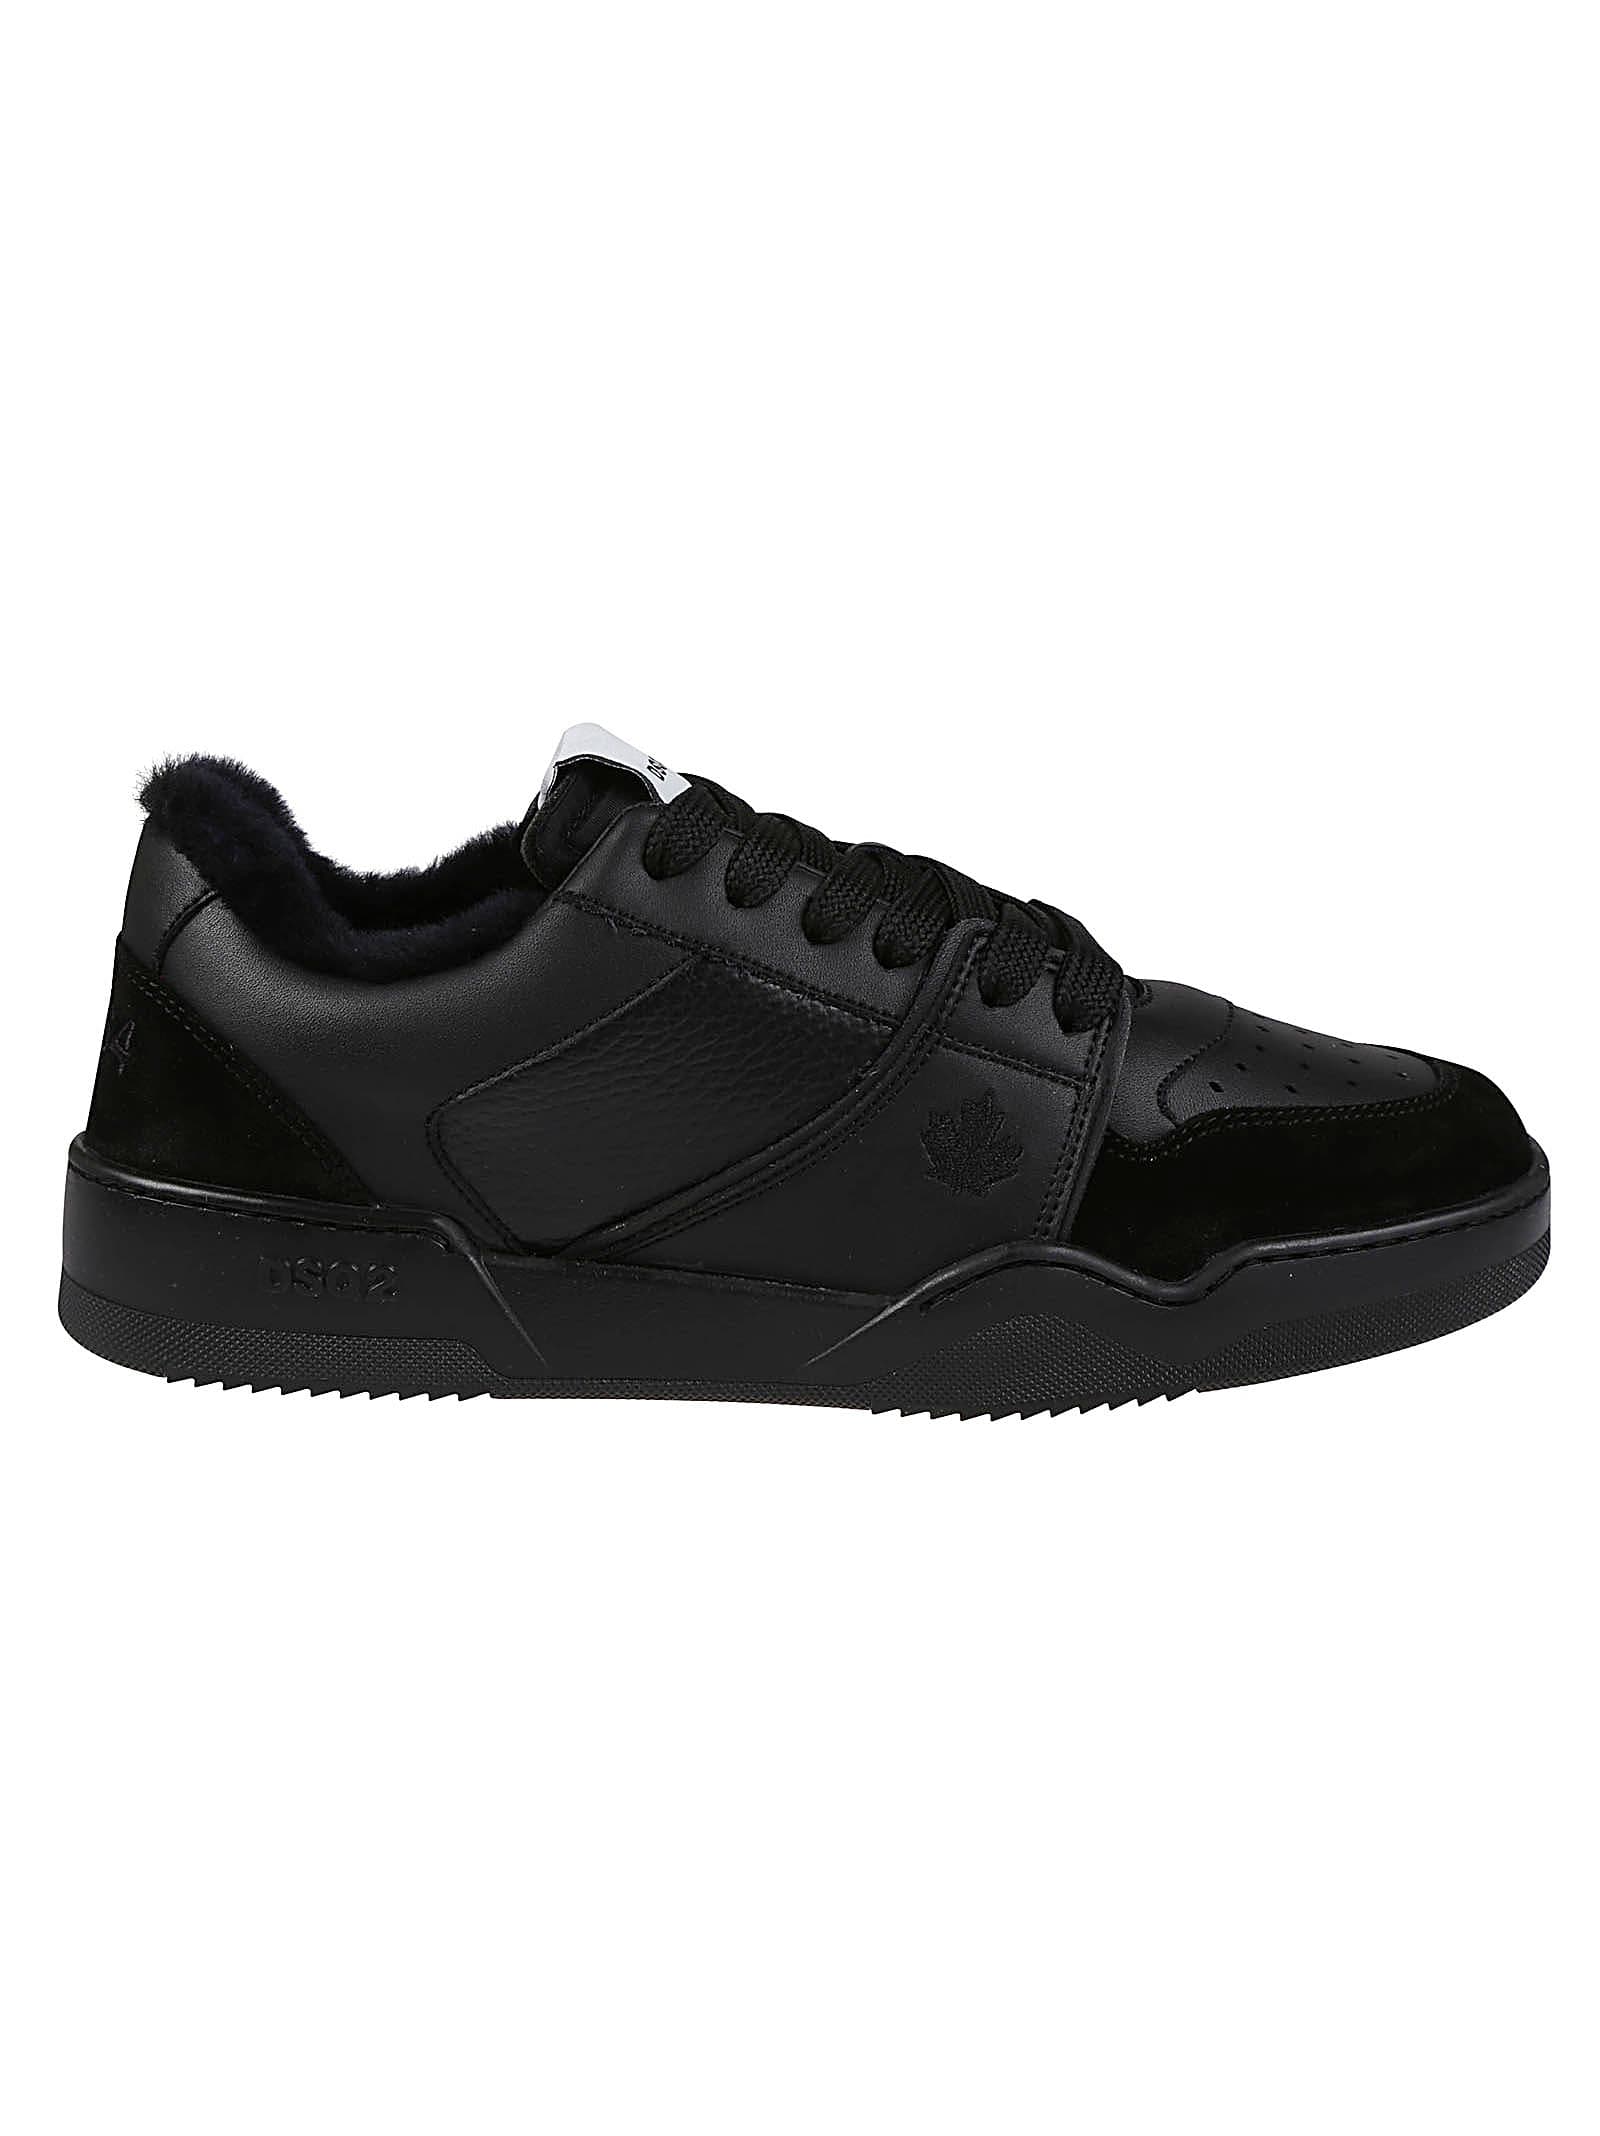 DSQUARED2 SPIKER LACE-UP LOW TOP SNEAKERS